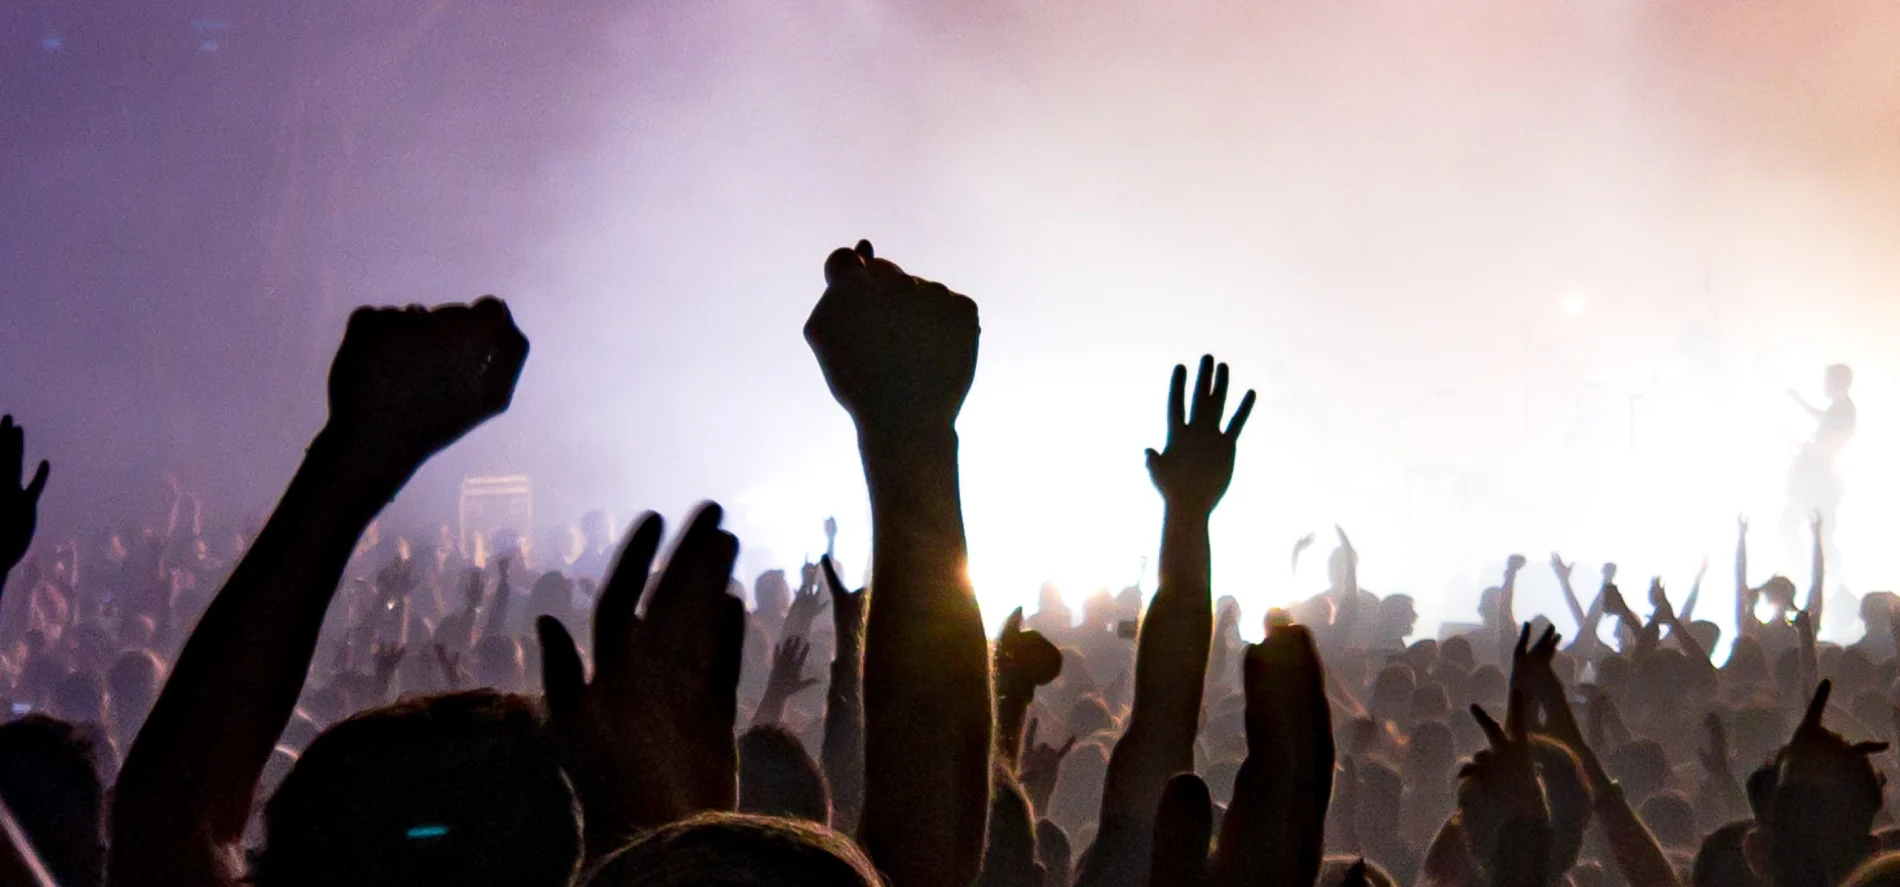 Image of a crowd of people at a concert event